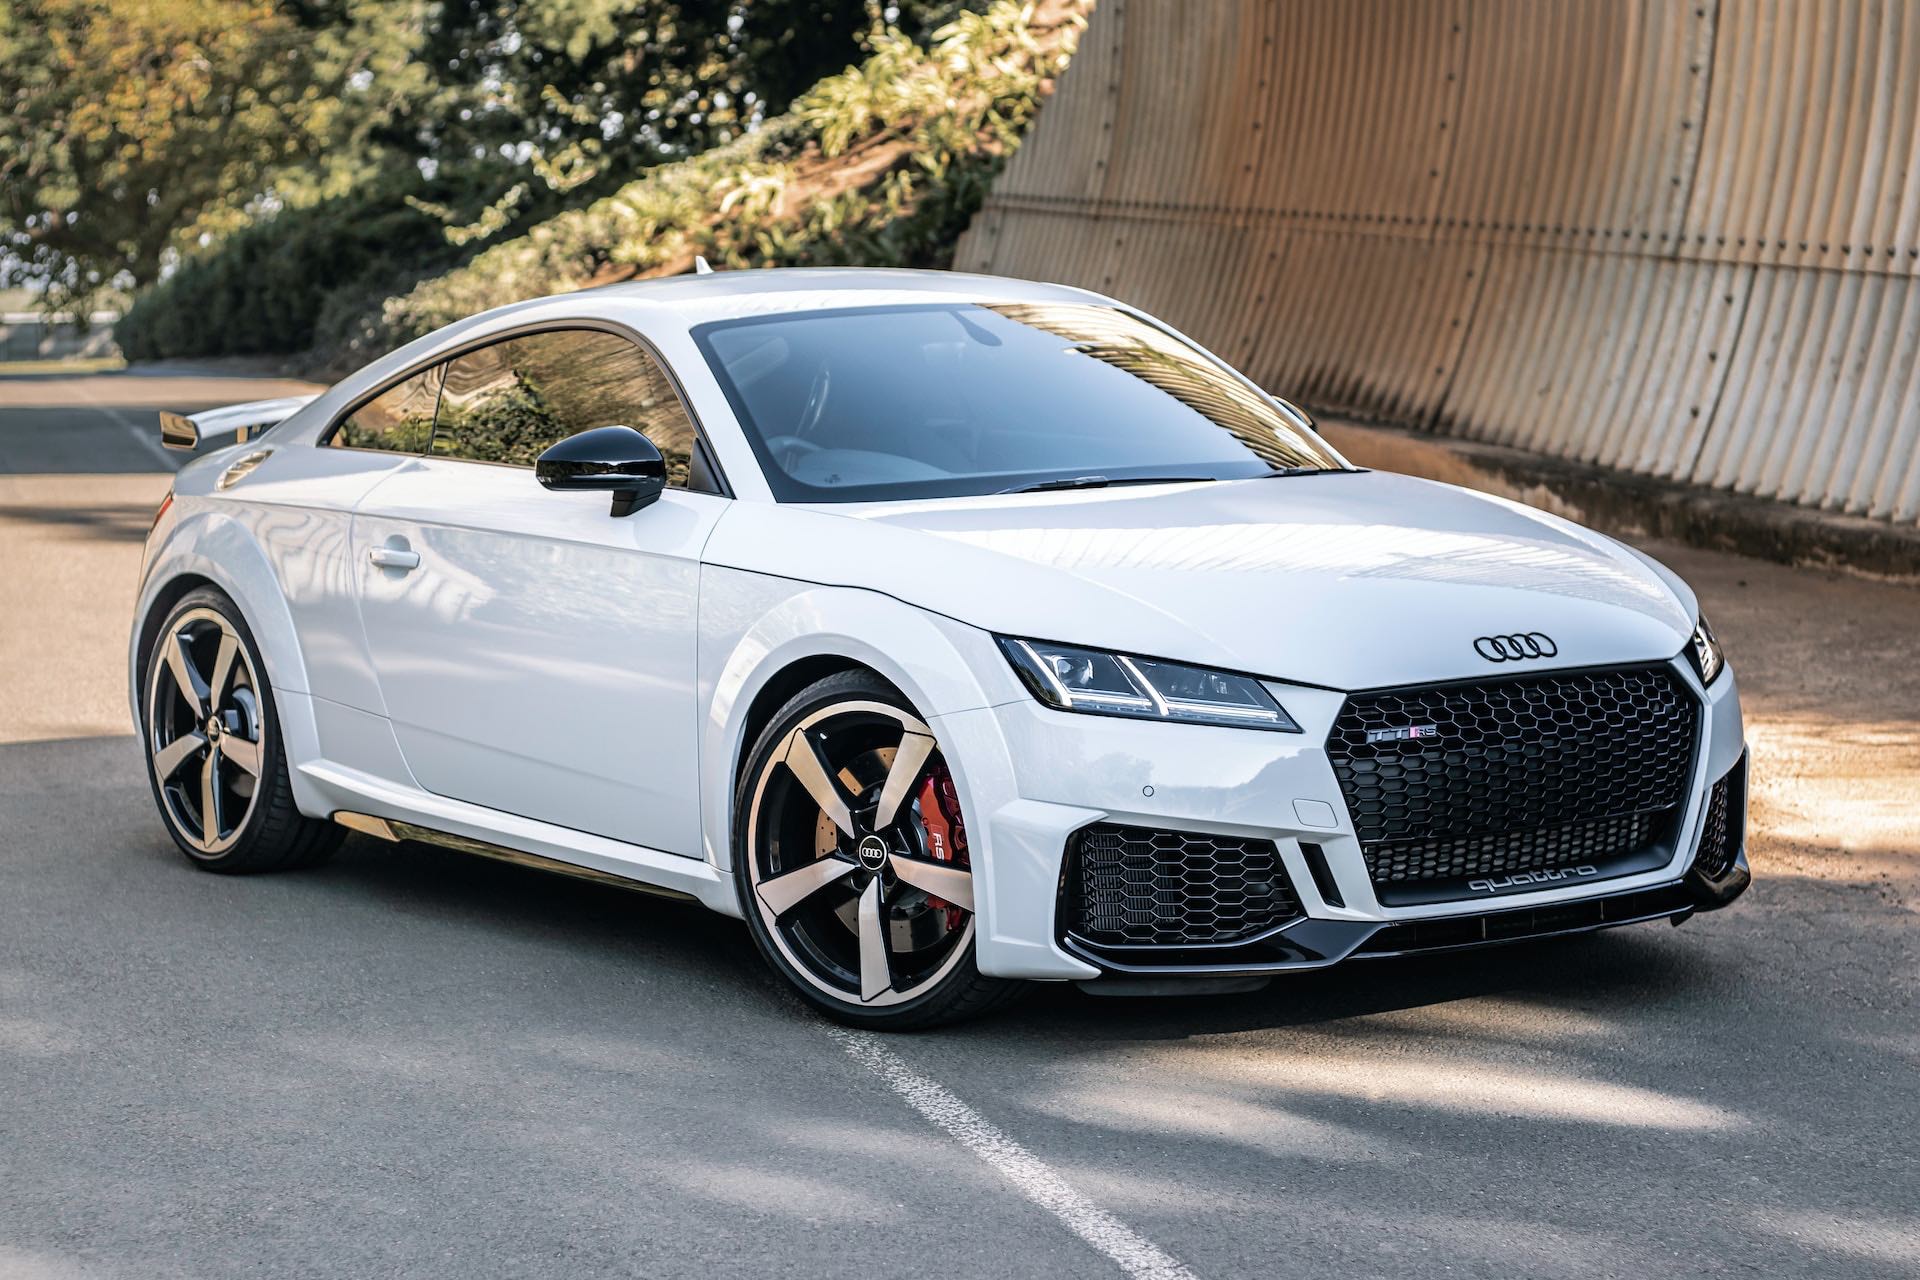 The Audi TT's Stunning Departure: An Iconic Blend of Style and Heritage